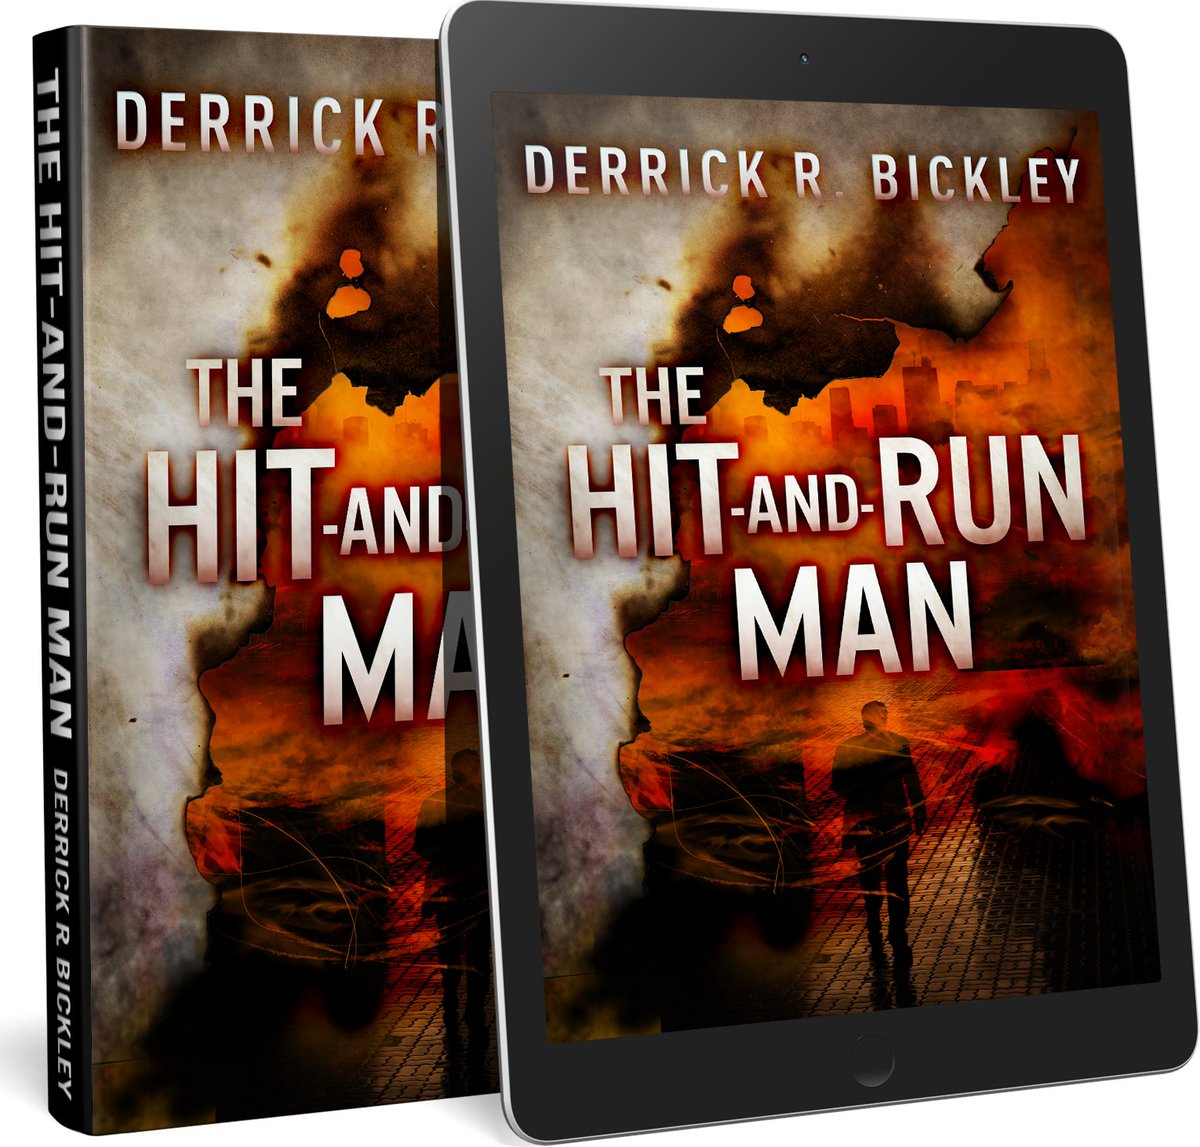 'A well-written #crimethriller with plenty of twists and turns' FIVE/FOUR star mybook.to/HitAndRunMan THE HIT-AND-RUN MAN at #Kindle or your favourite digital store PAPERBACK HARDBACK (Amzn inc L/Print B&N inc L/Print Wmart) AUDIOBOOK #crimefiction #mustread #pageturner #crime